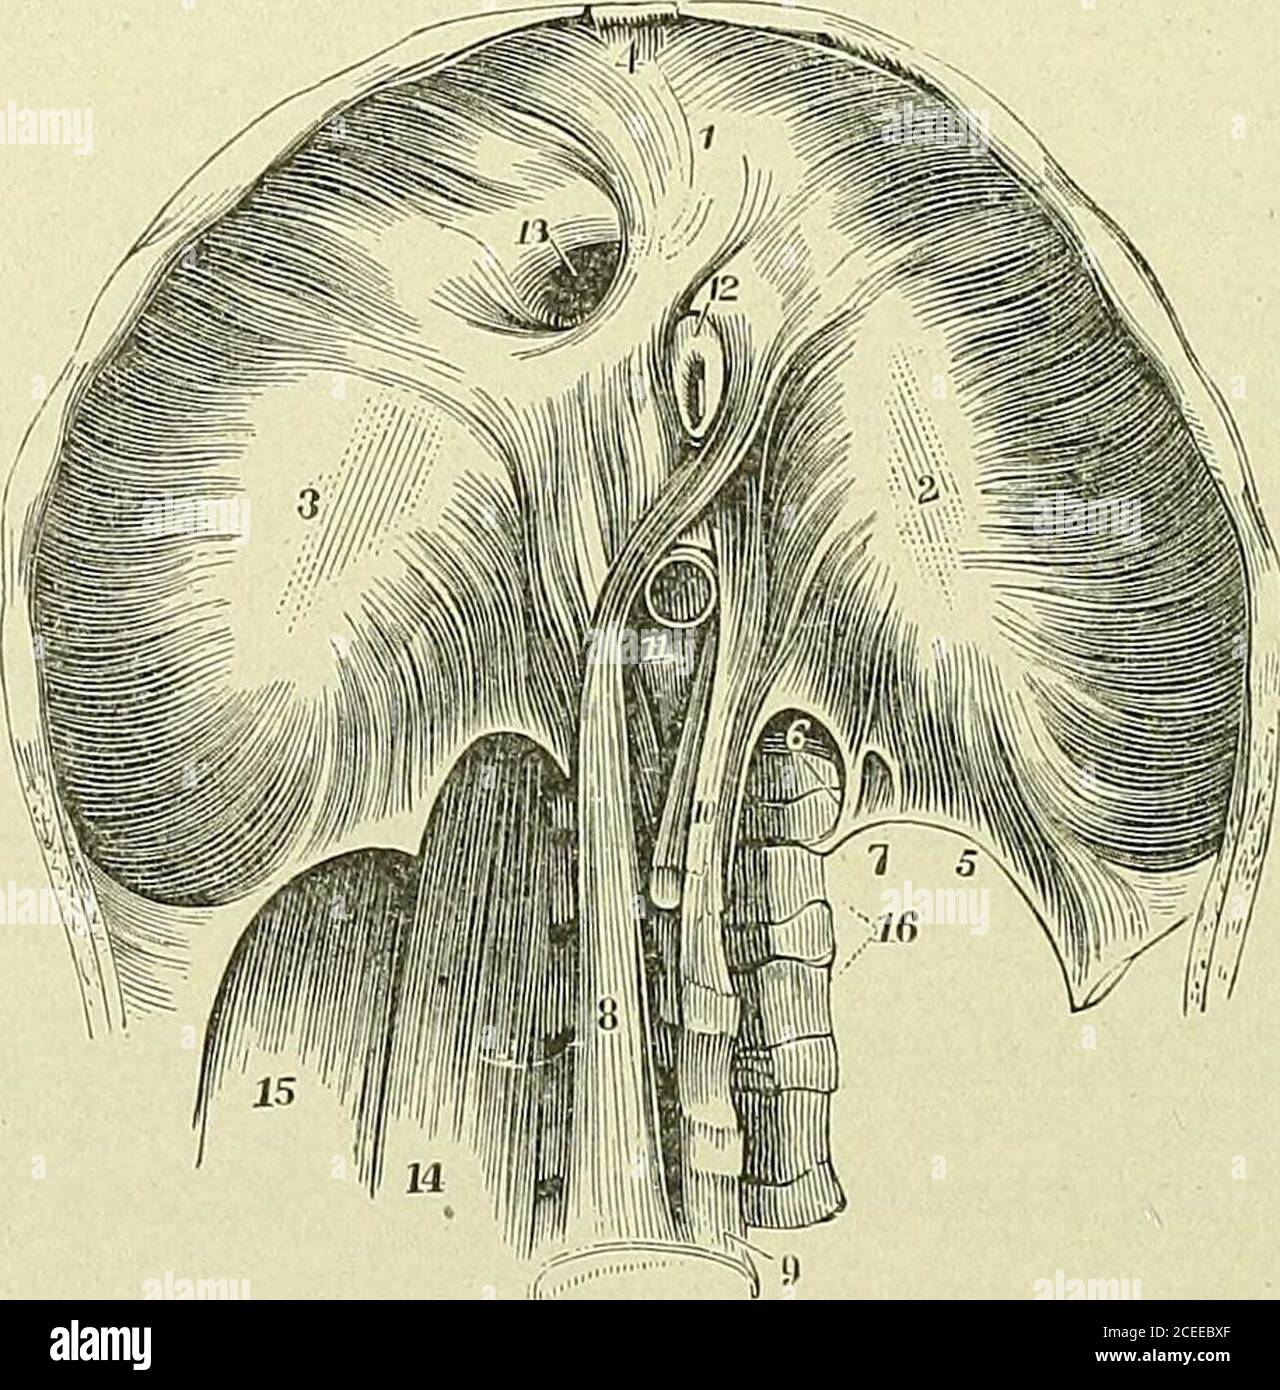 . Text-book of anatomy and physiology for nurses. Fig. 76.—The Diaphragm. Dotted lines indicate descent in contraction. —(Holden.) 92 ANATOMY AND PHYSIOLOGY FOR NURSES. in the central tendon, b. From arches of lumbar fascia and thelower boundary of the thorax (seventh to twelfth ribs and xiphoidappendix). Insertion.—In a fiat central tendon, shaped like a clover leaf,near the center of the dome. The lateral portion arches higher thanthe central, forming a cupola on each side. Action.—When the diaphragm contracts it becomes flattened,pressing upon the abdominal organs; when it relaxes, it sprin Stock Photo